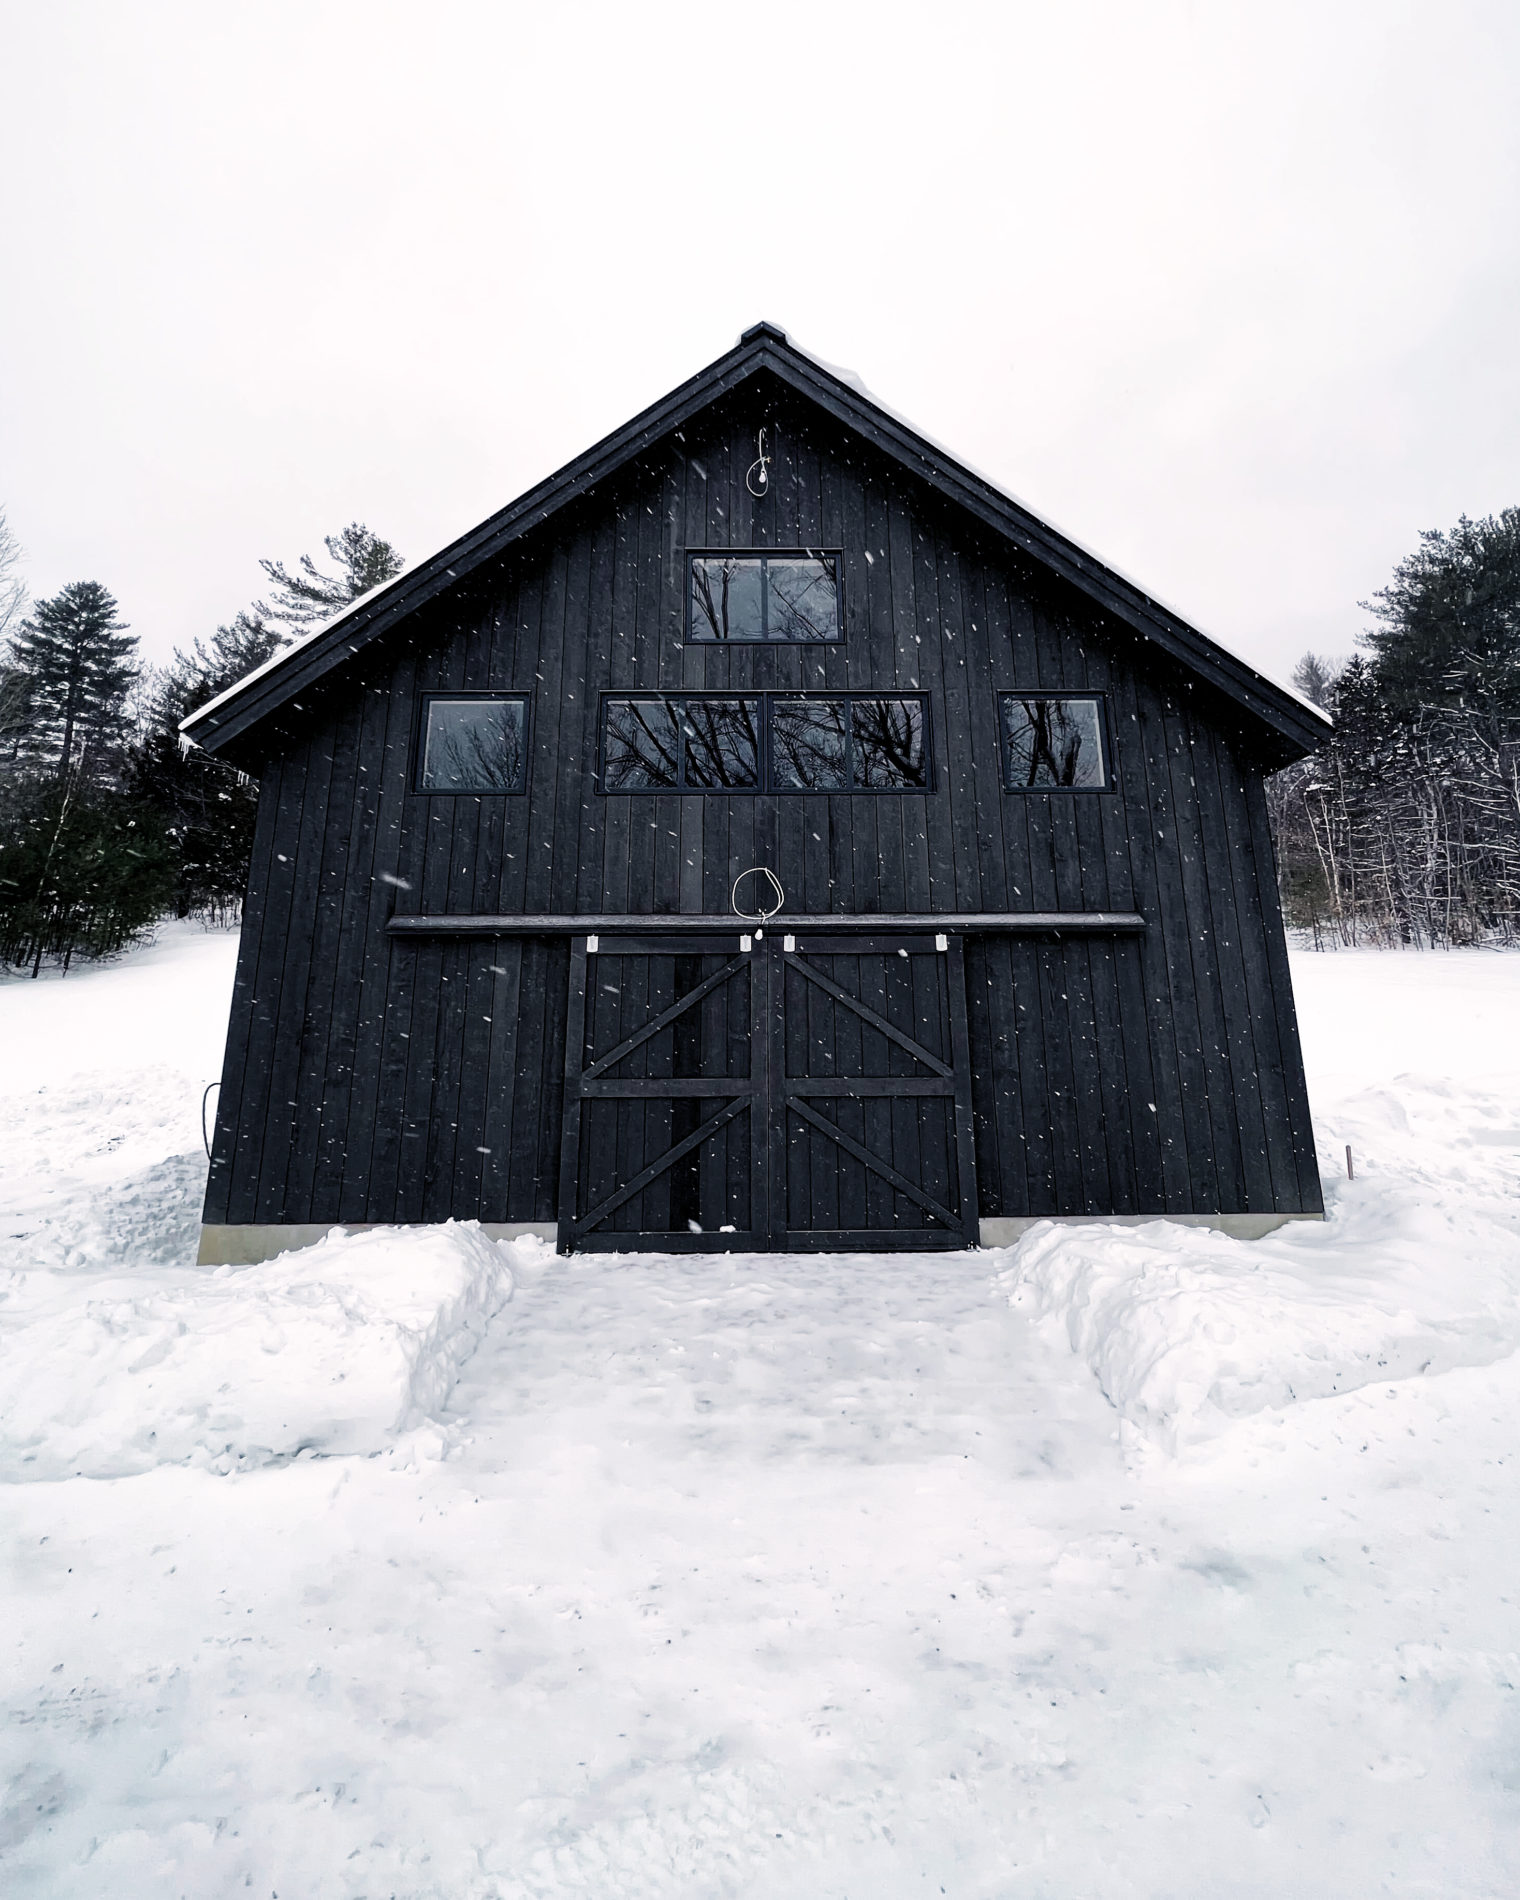 New Hampshire barn that uses a radiant floor for both heating and cooling, managed via Messana mControls.